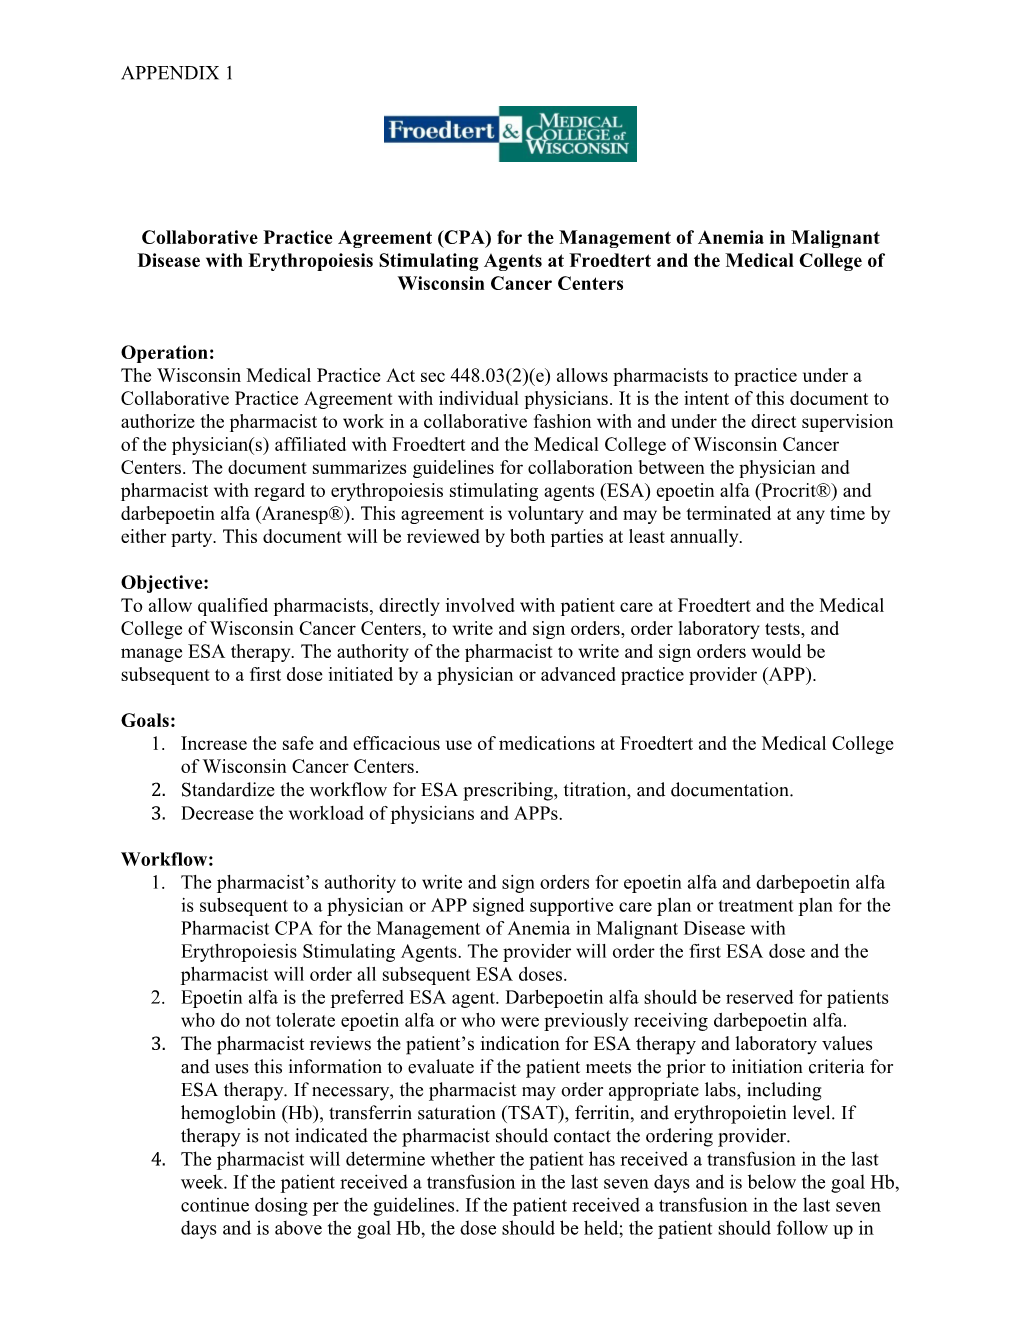 Collaborative Practice Agreement (CPA) for the Management of Anemia in Malignant Disease